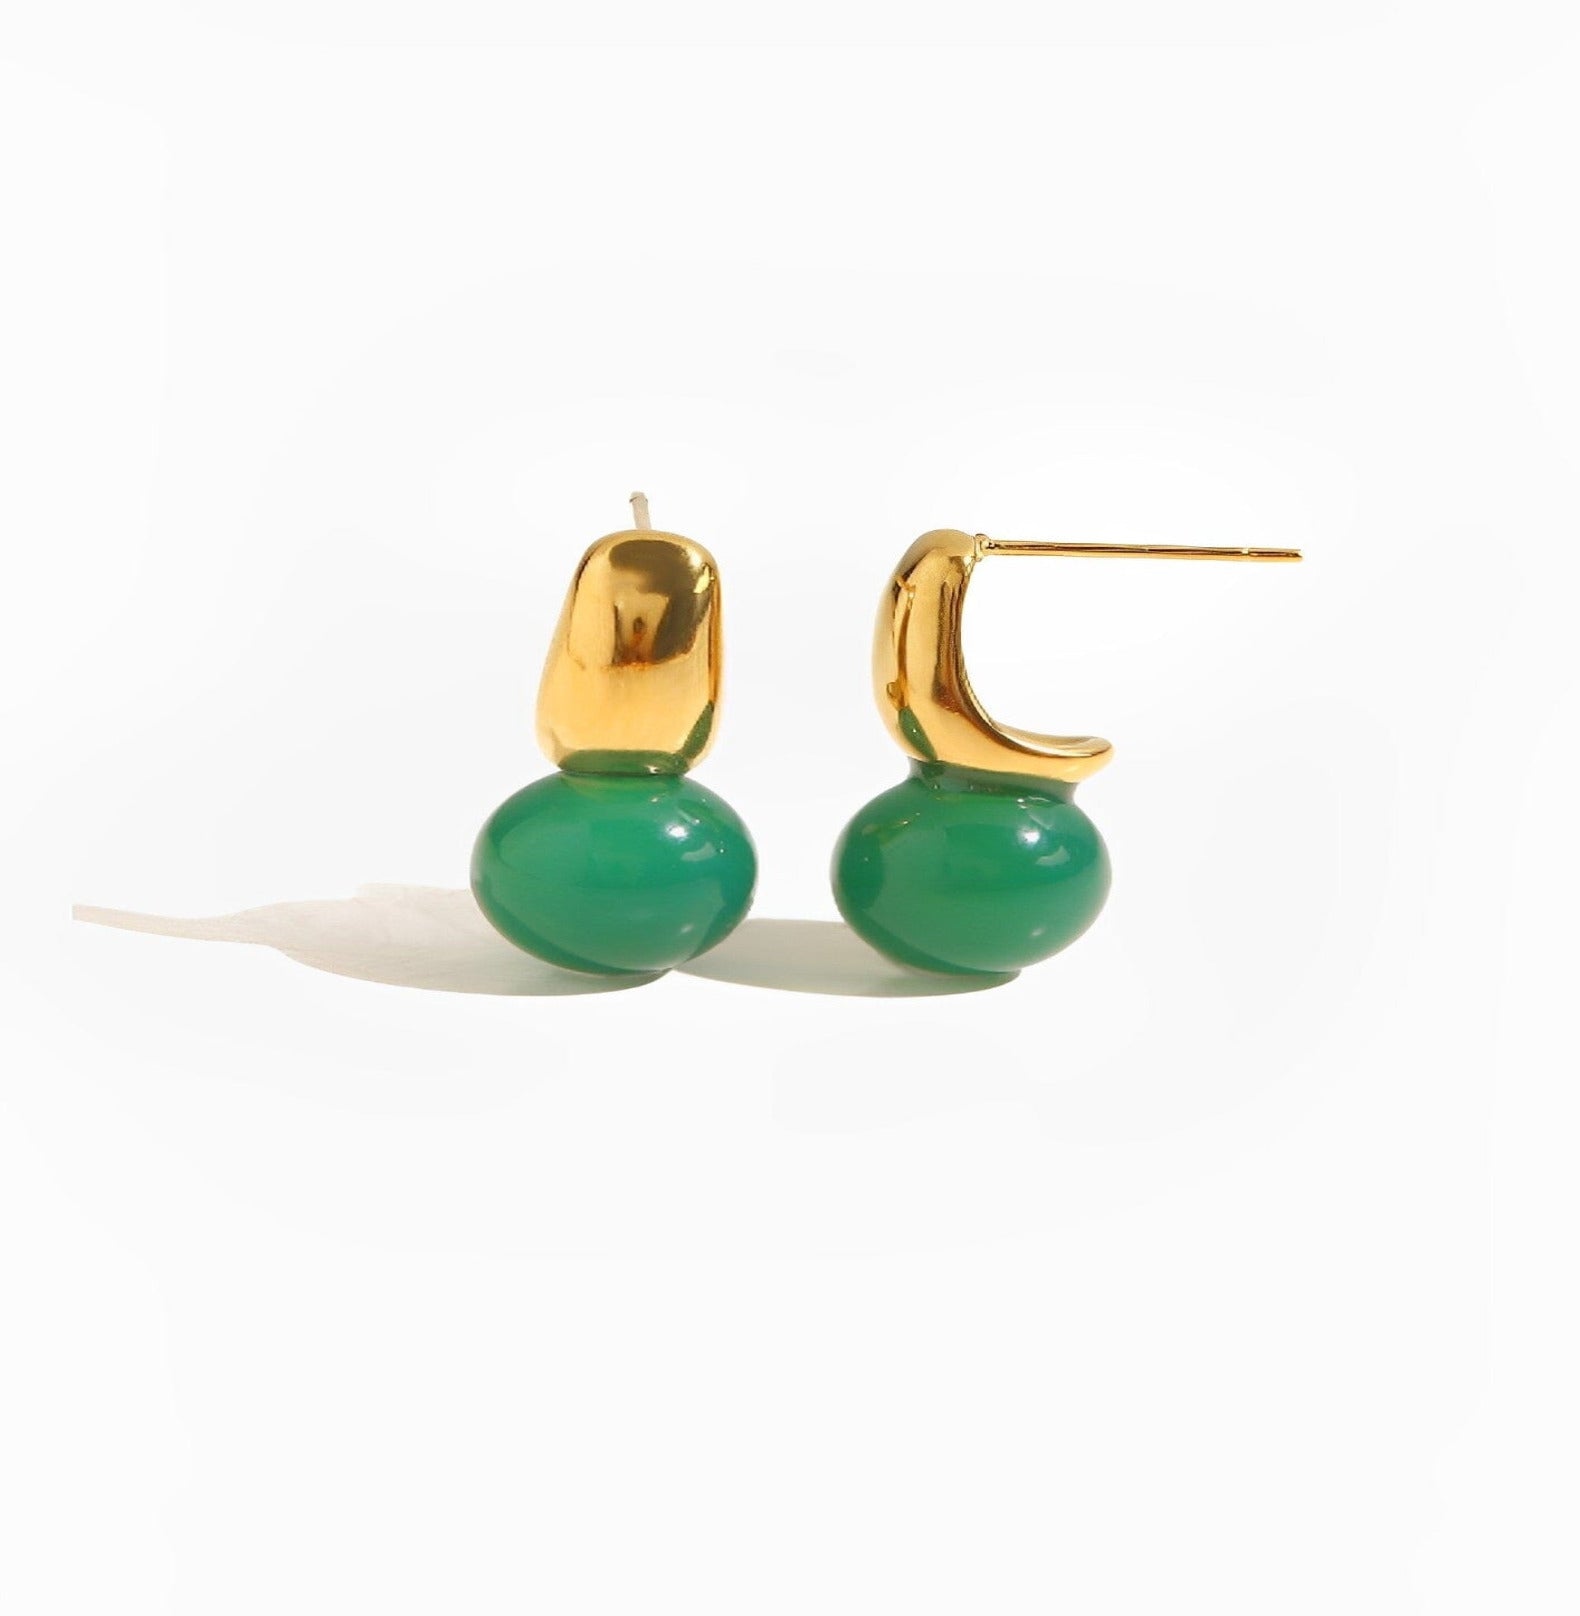 GREEN AGATE EARRINGS earing Yubama Jewelry Online Store - The Elegant Designs of Gold and Silver ! 